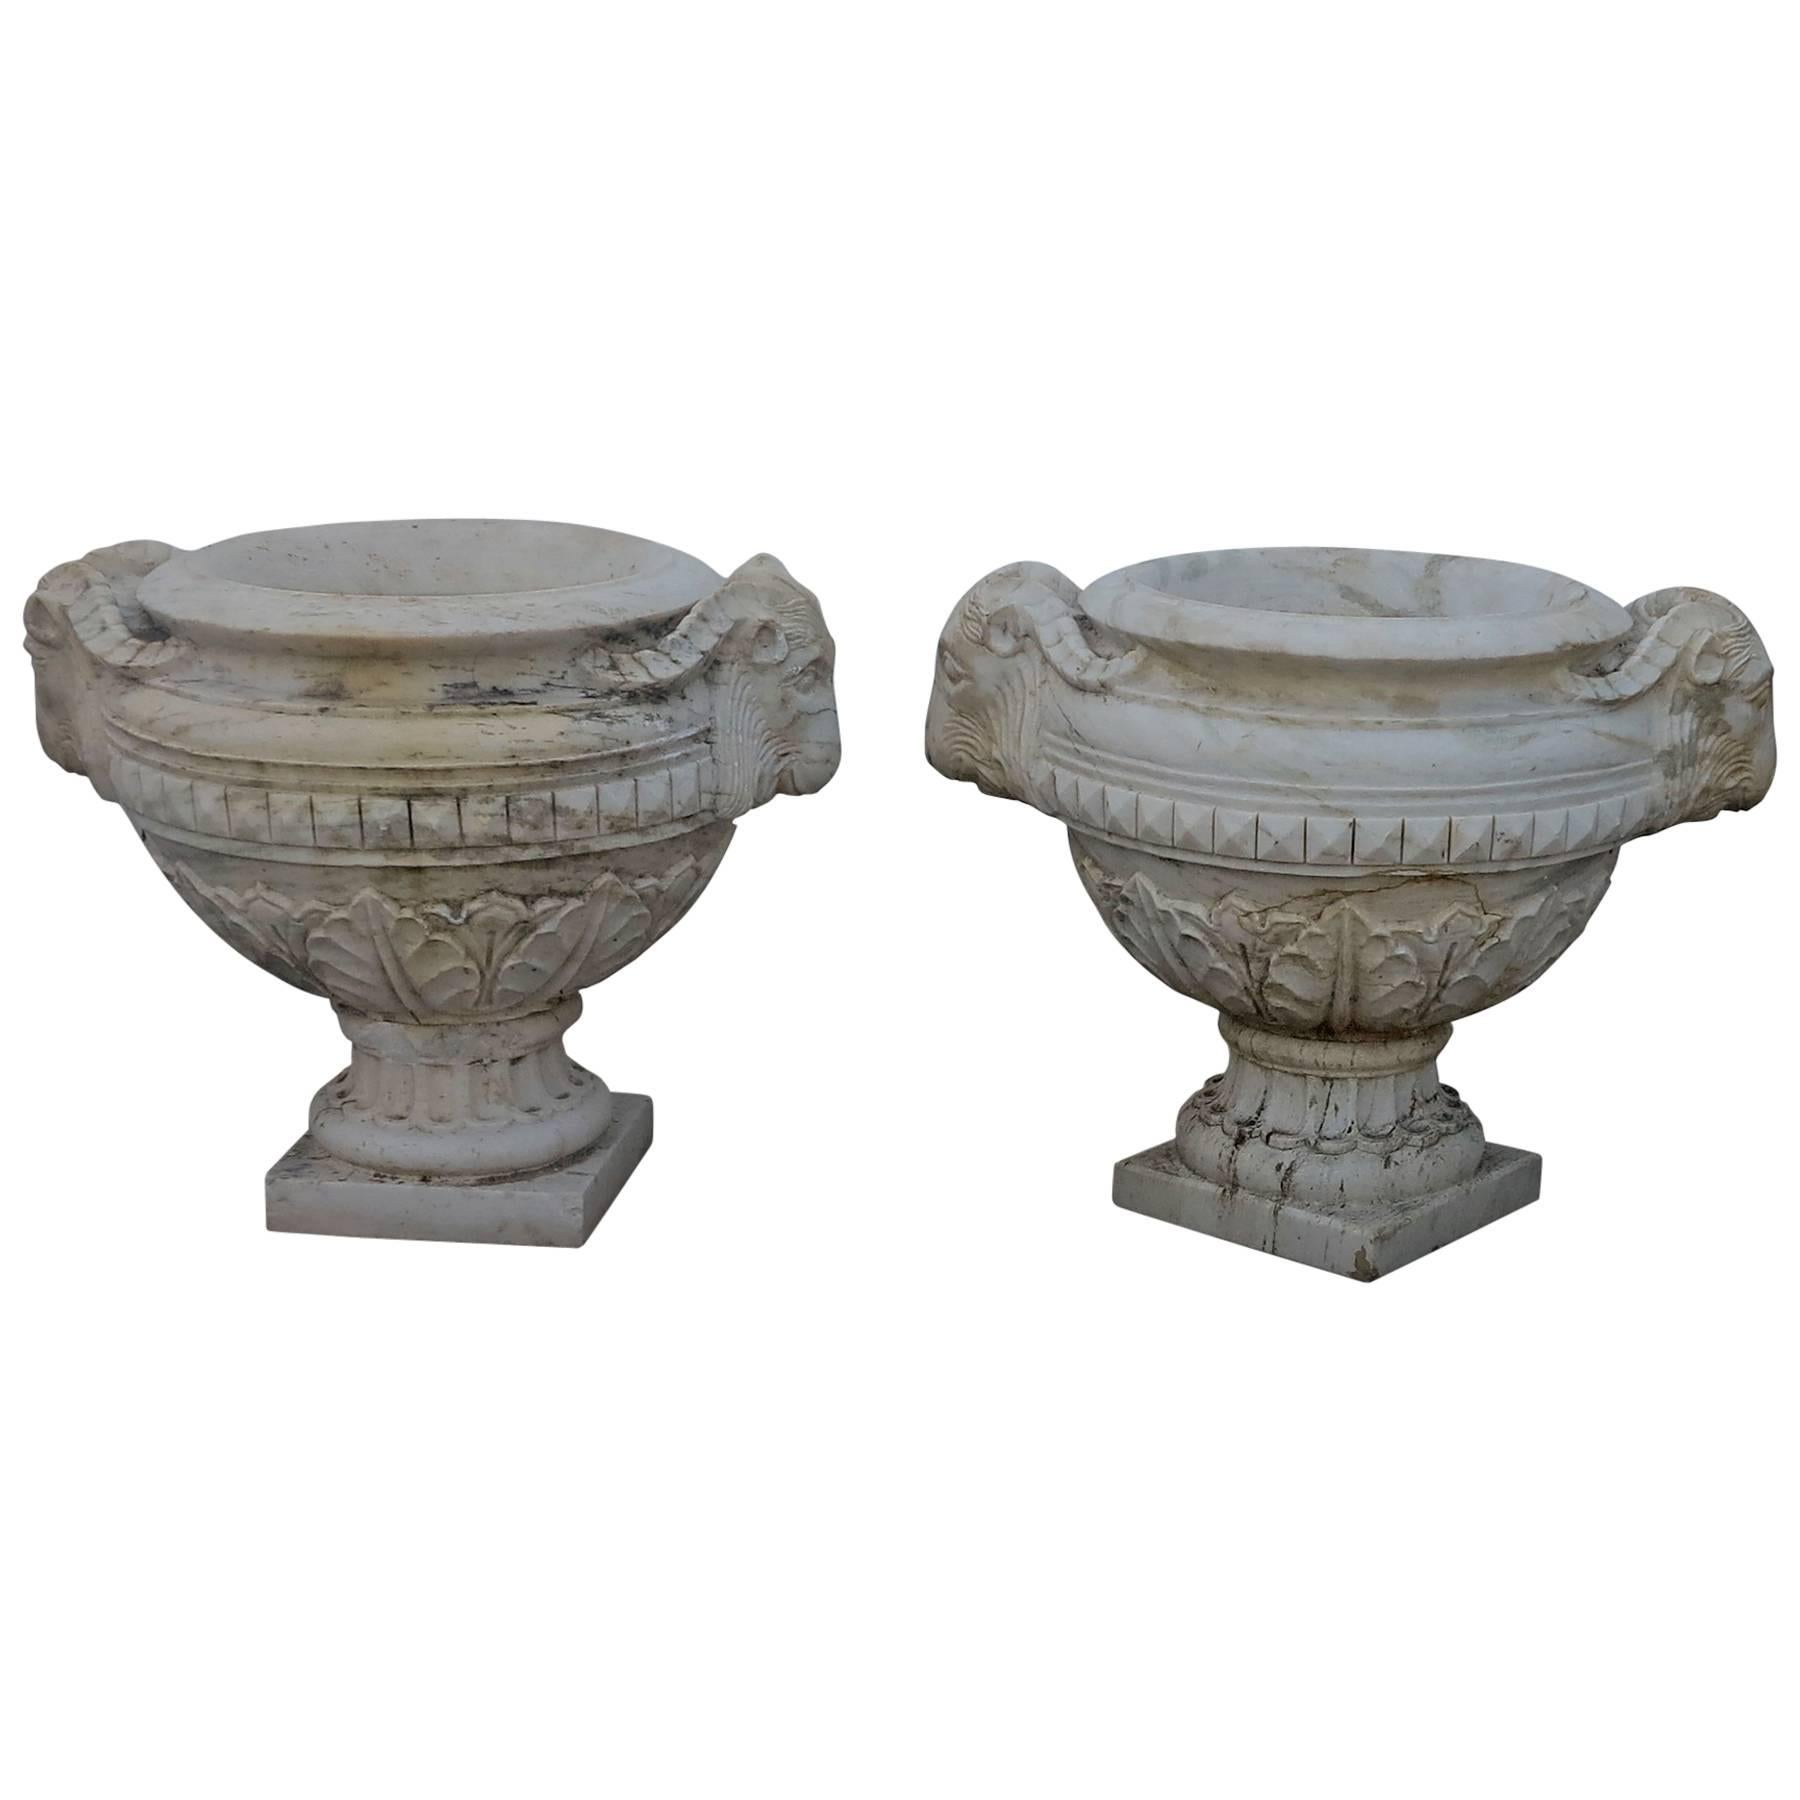 19th Century Large Carved Marble Ram Head Urns Planters